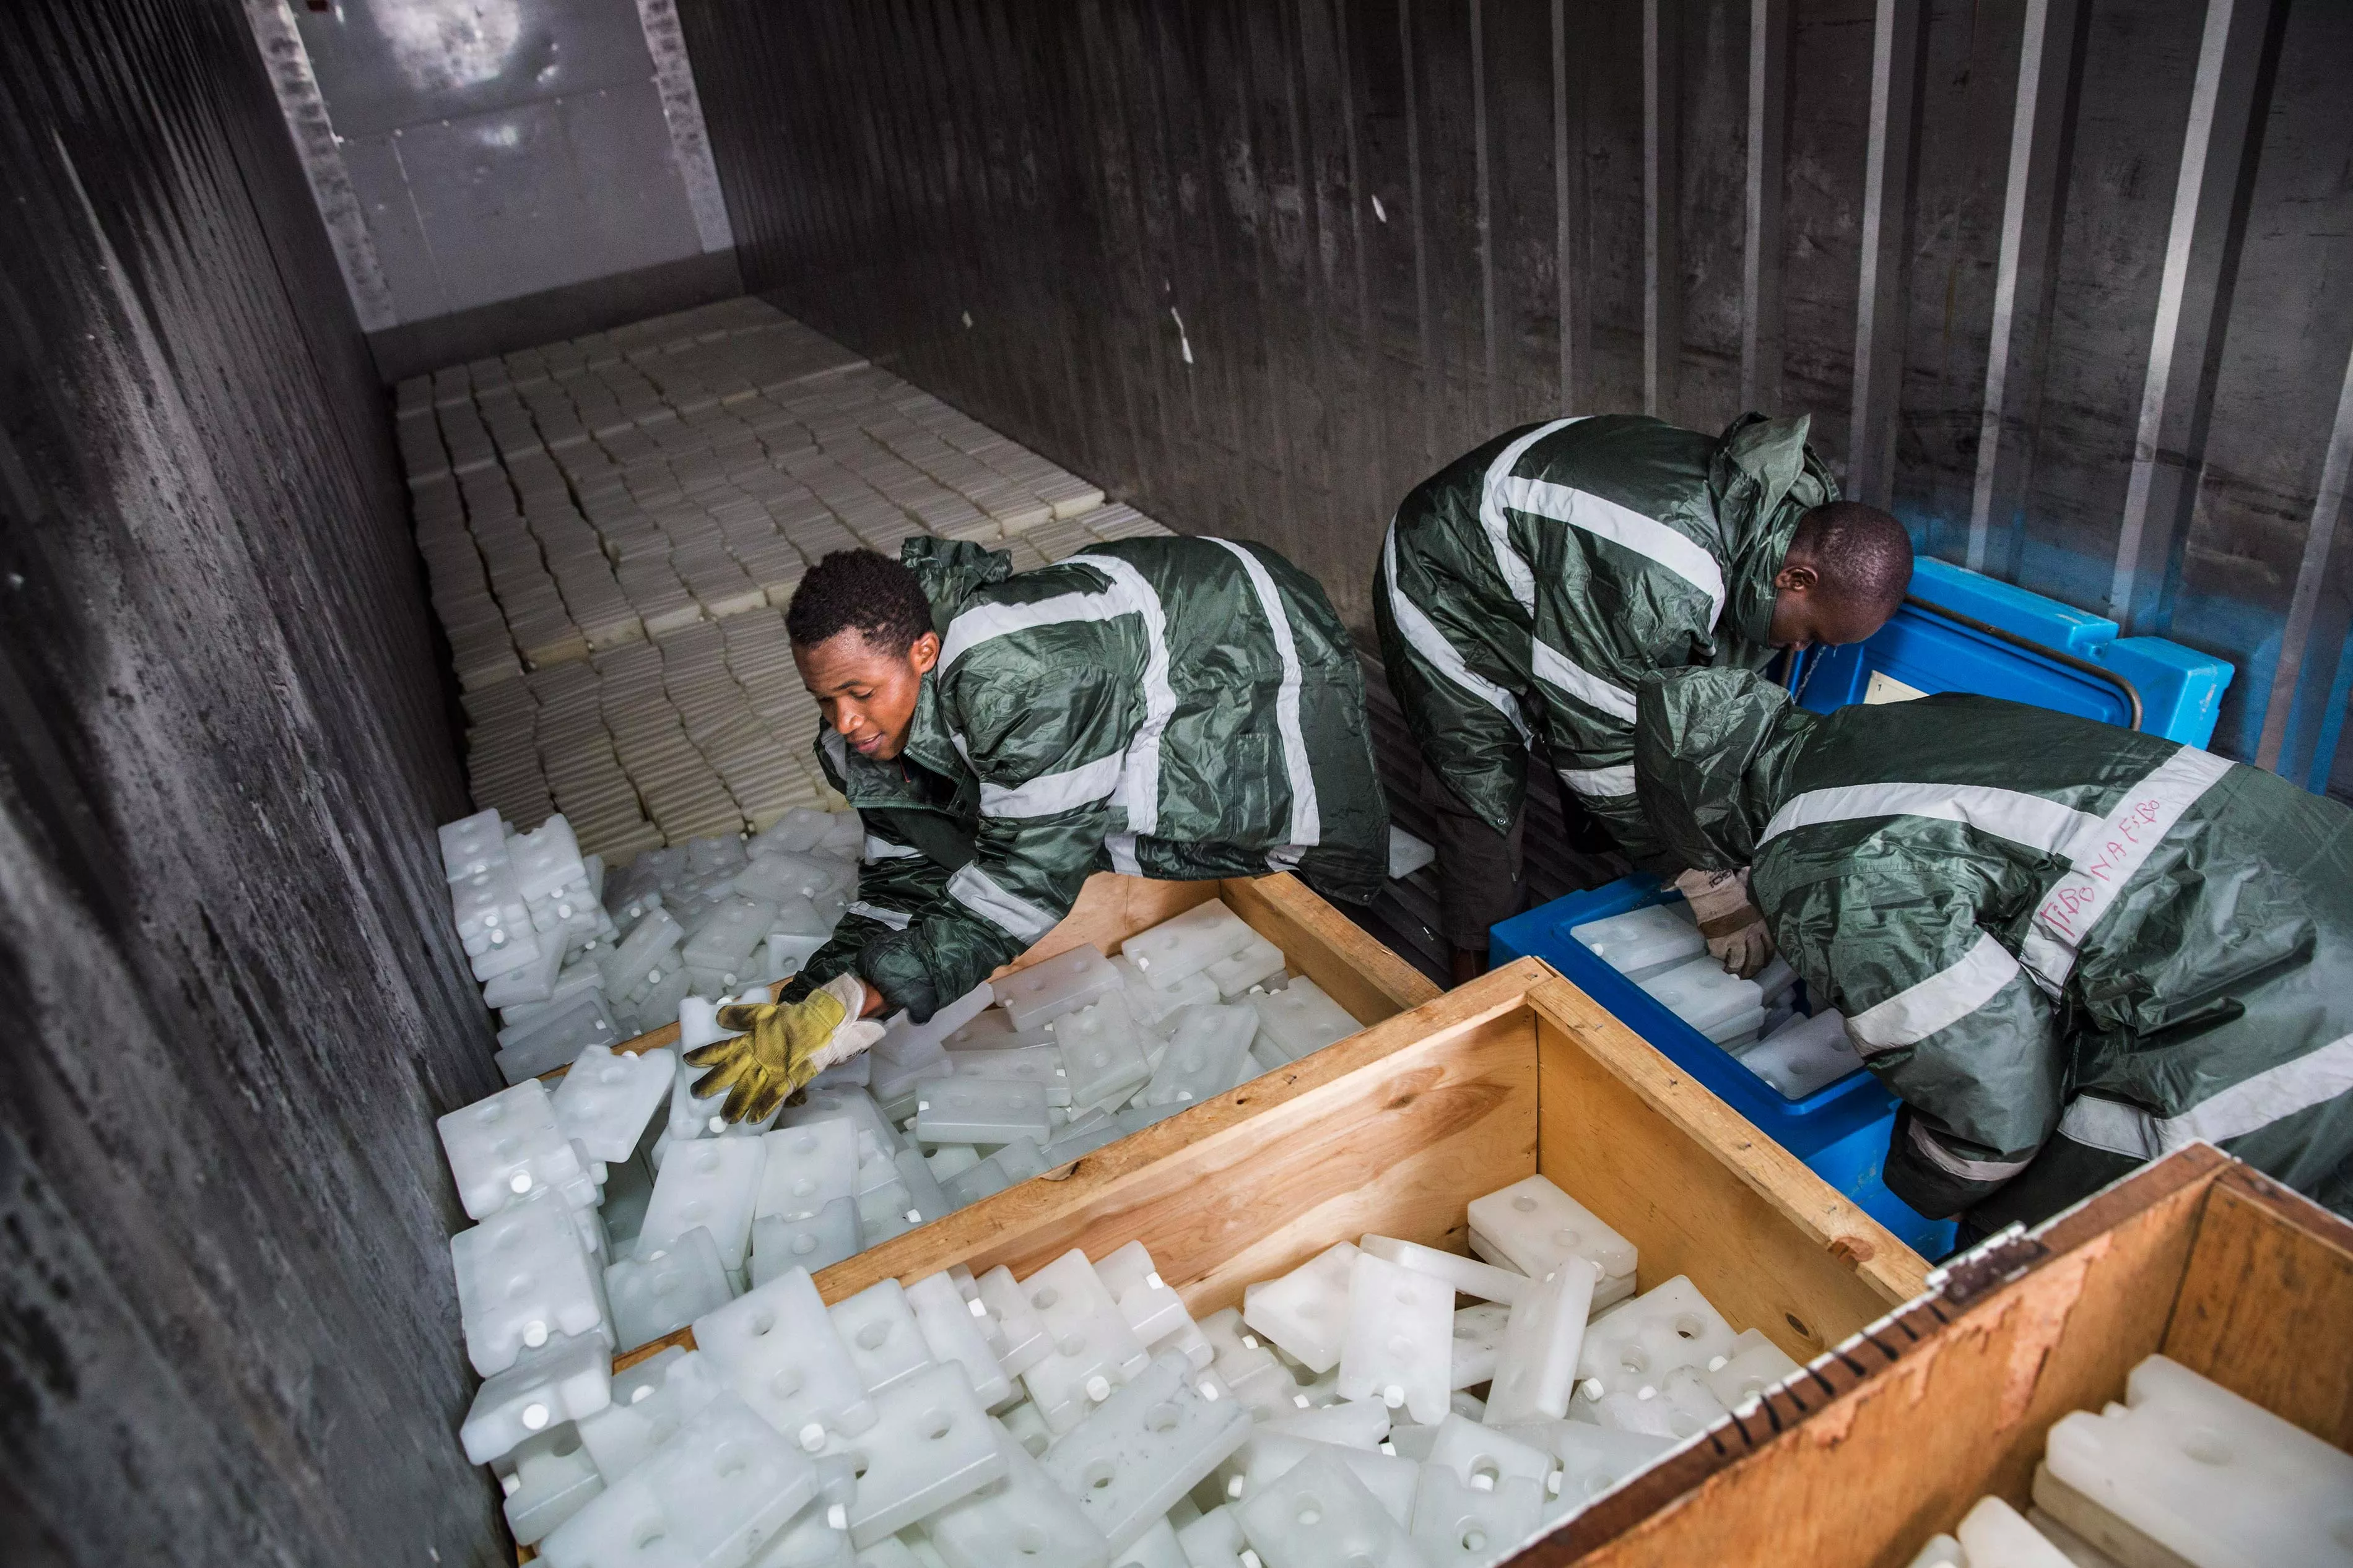 Medecins Sans Frontieres (MSF) staff stock 17.000 icepacks in cooler containers for use in the massive Yellow Fever vaccination campaign in DRC